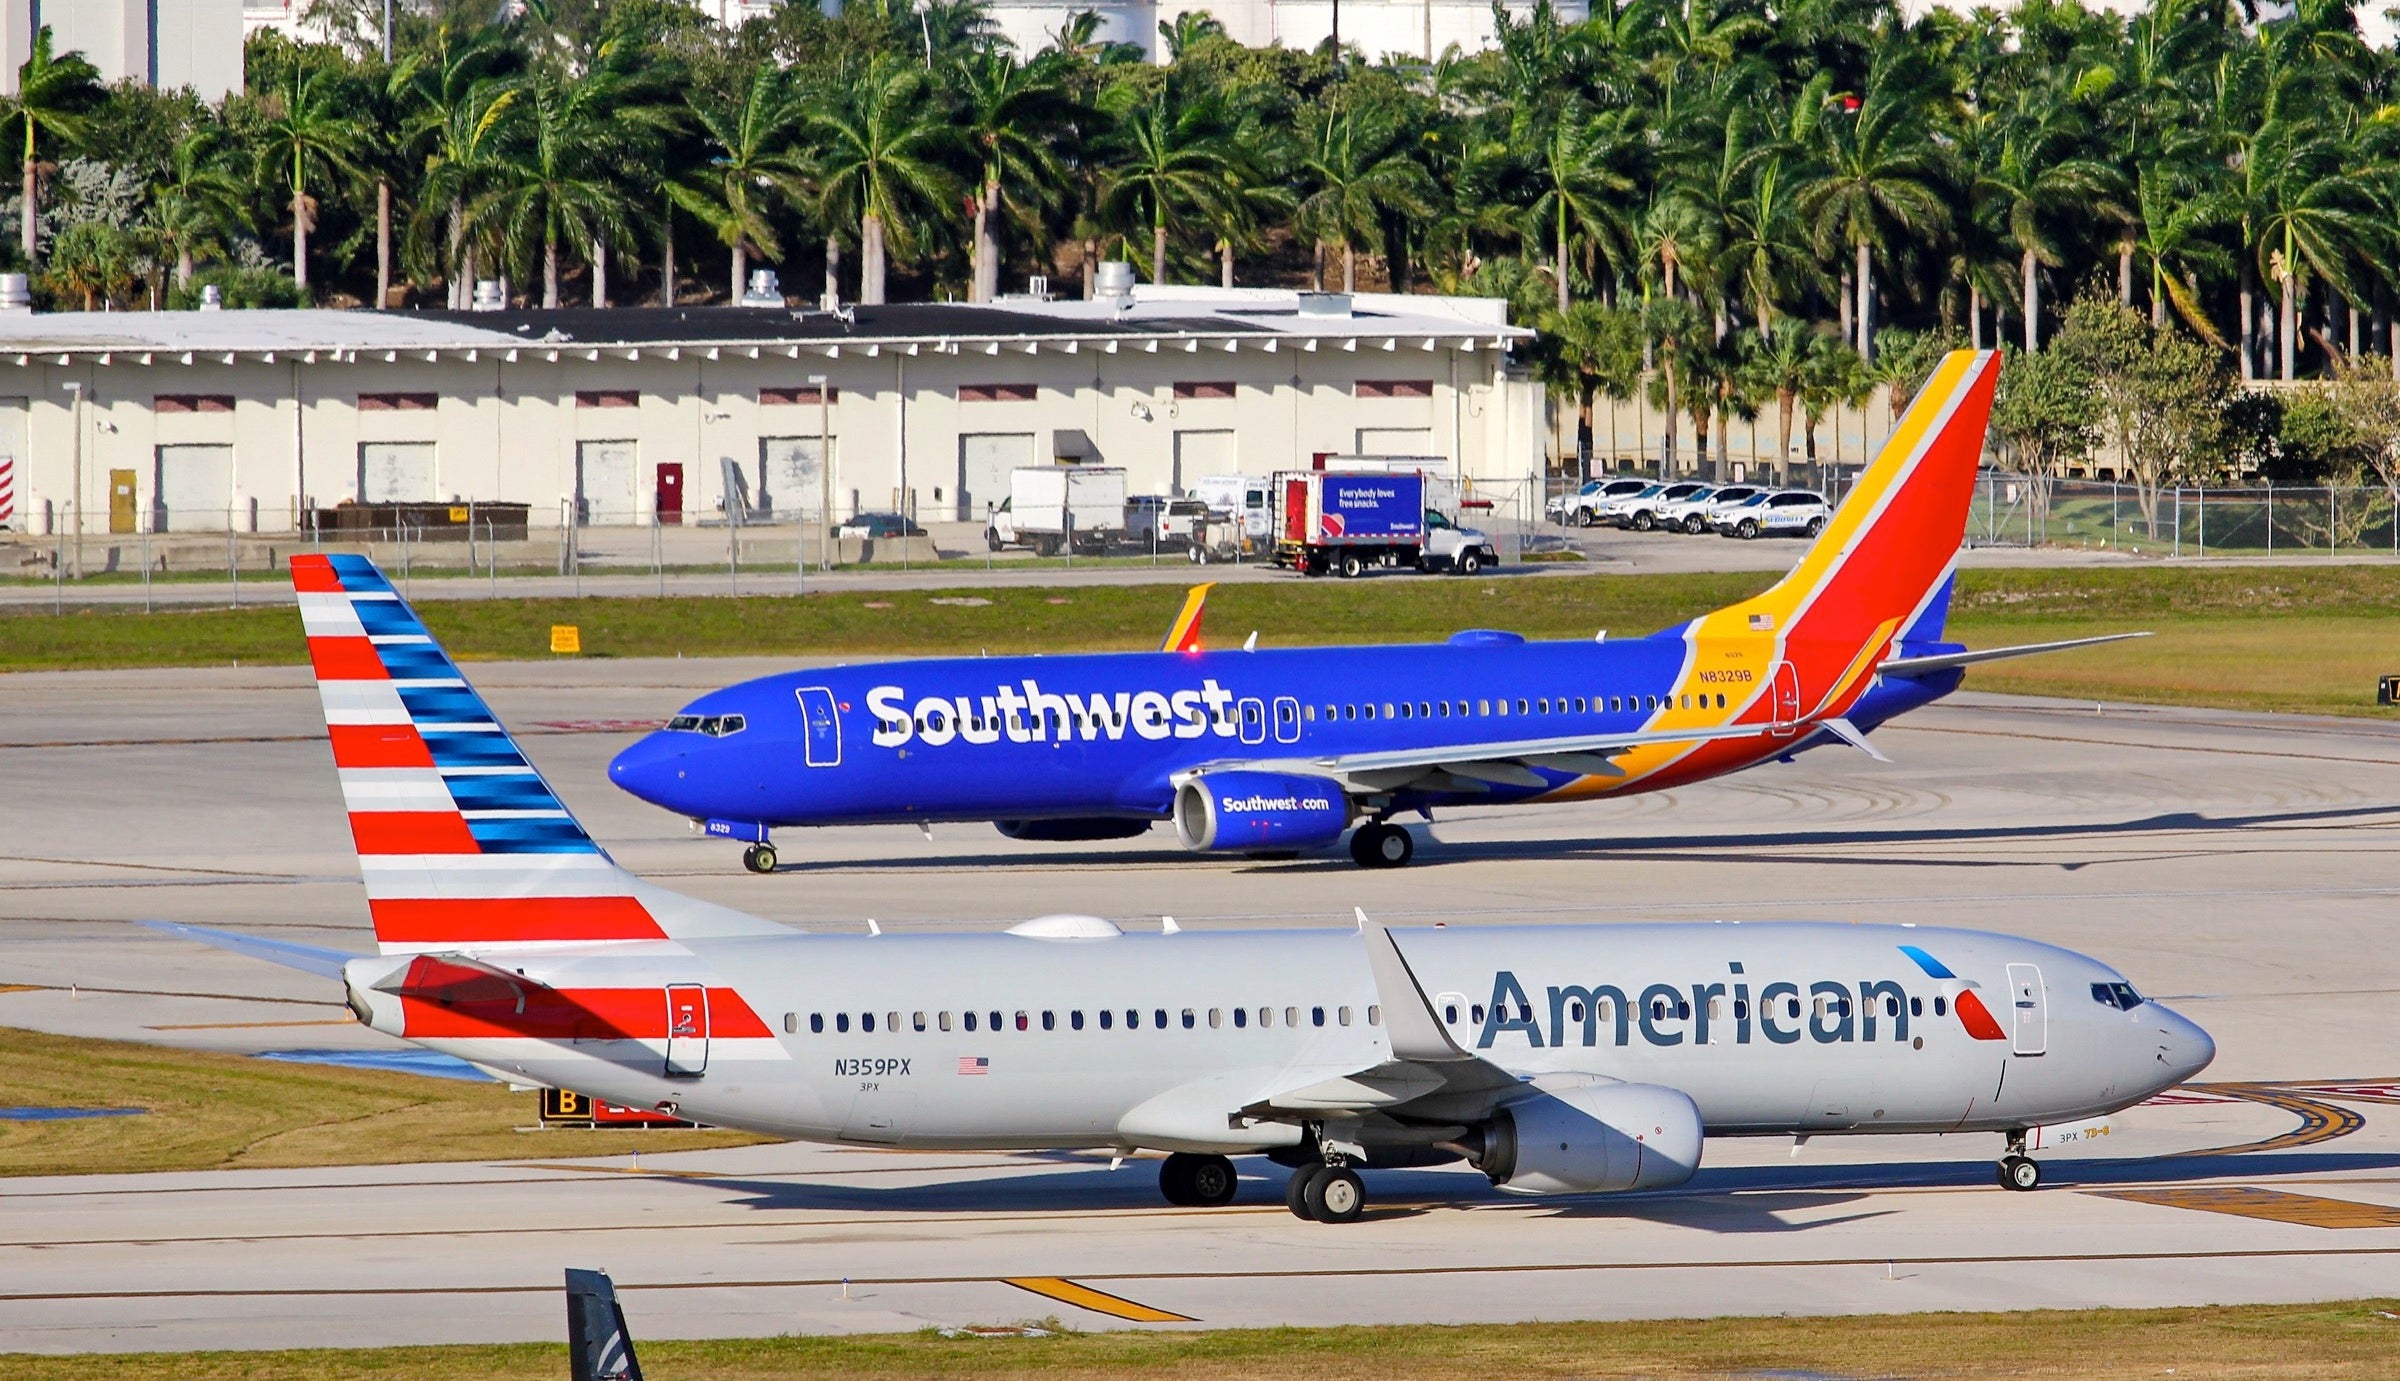 Southwest Airlines and American Airlines planes on runway